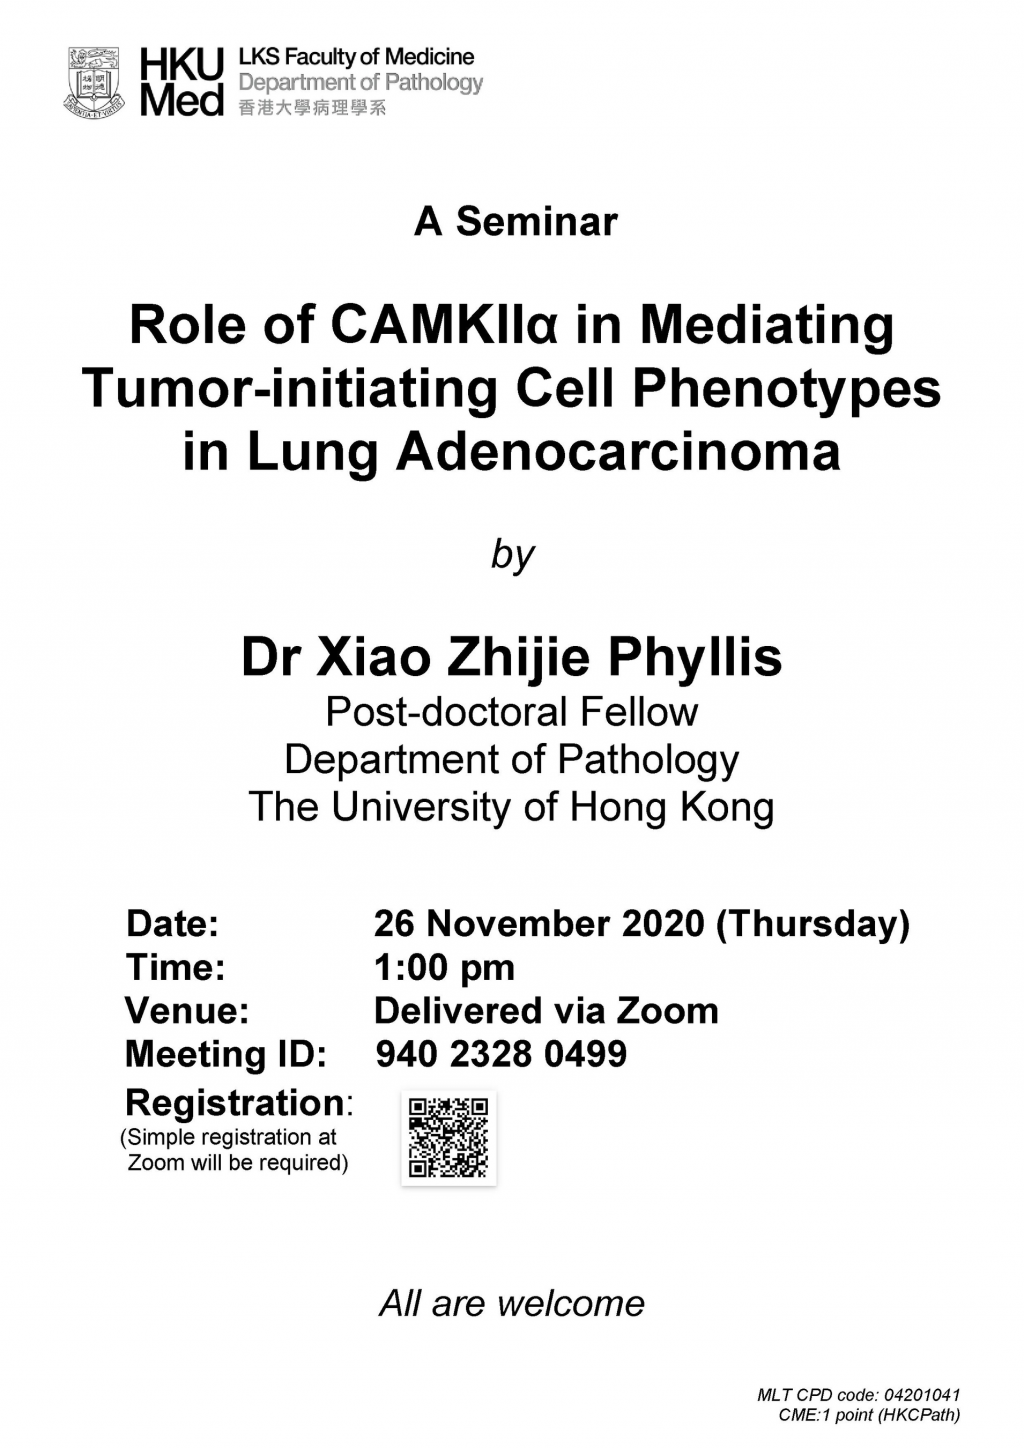 Seminar by Dr Xiao Zhijie Phyllis on 26 Nov (1 pm)